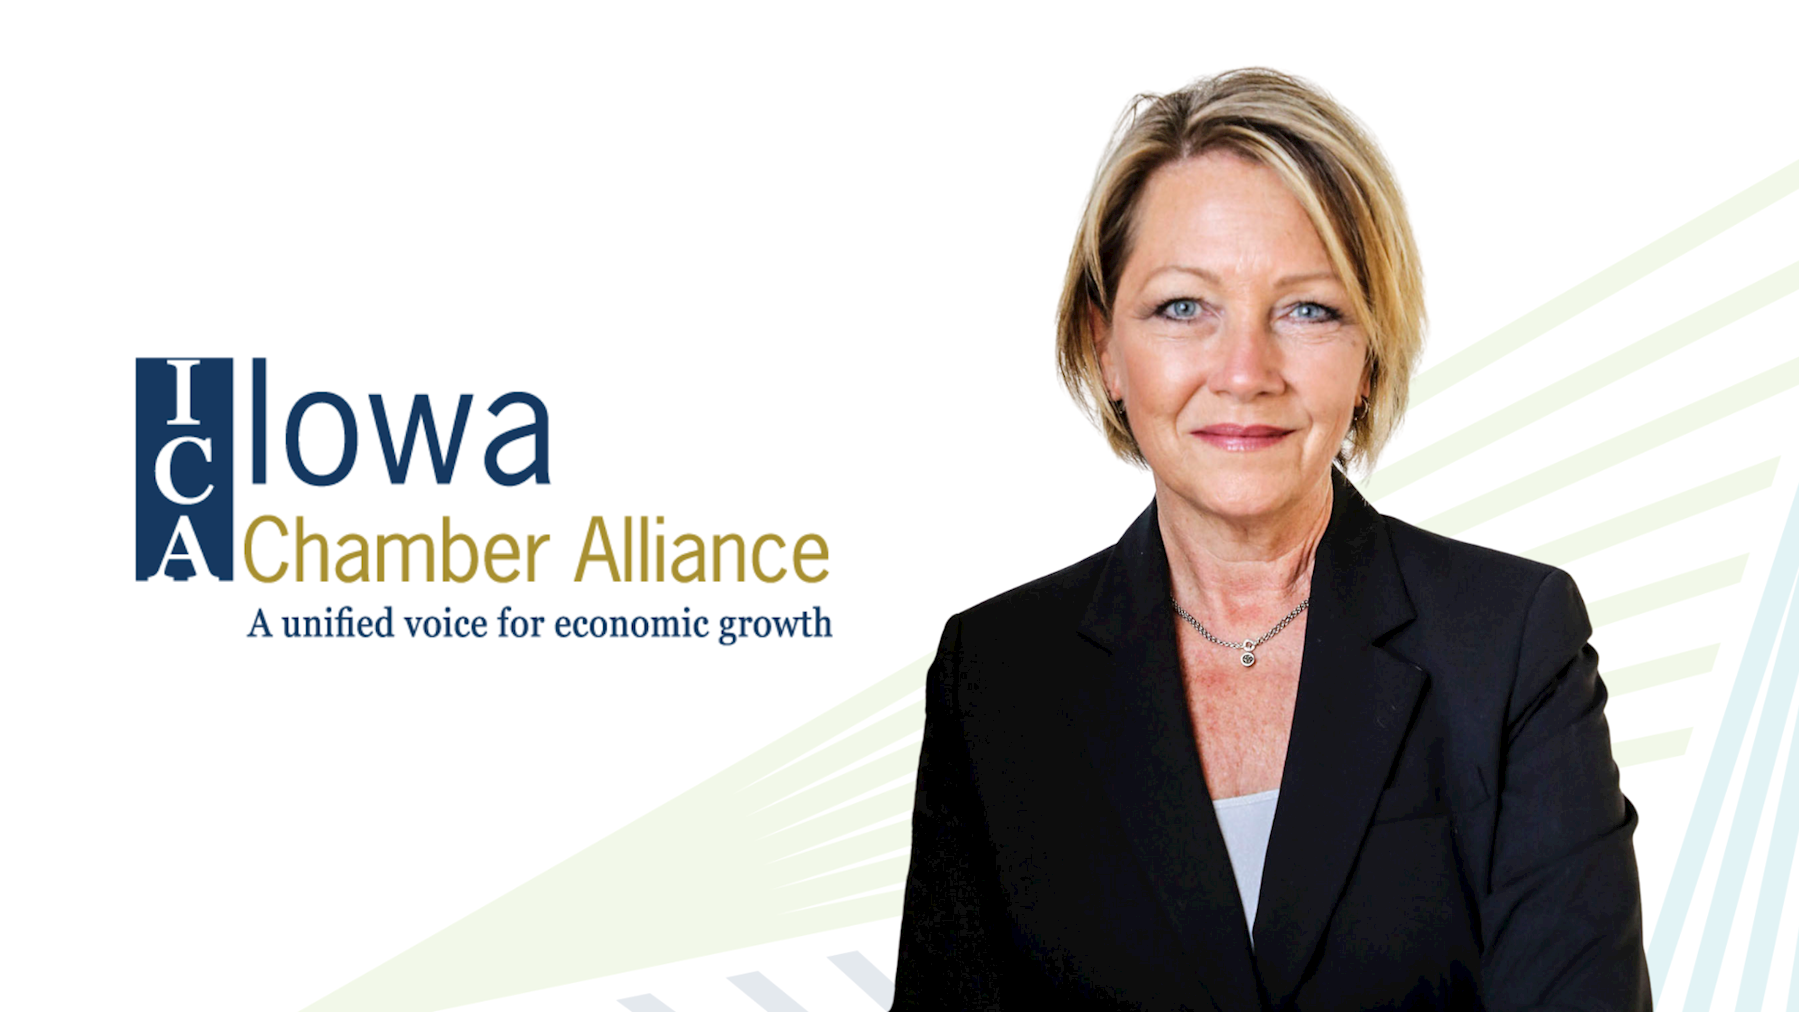 Iowa Chamber Alliance Editorial on Iowa Business Climate - Accentuate the Positive